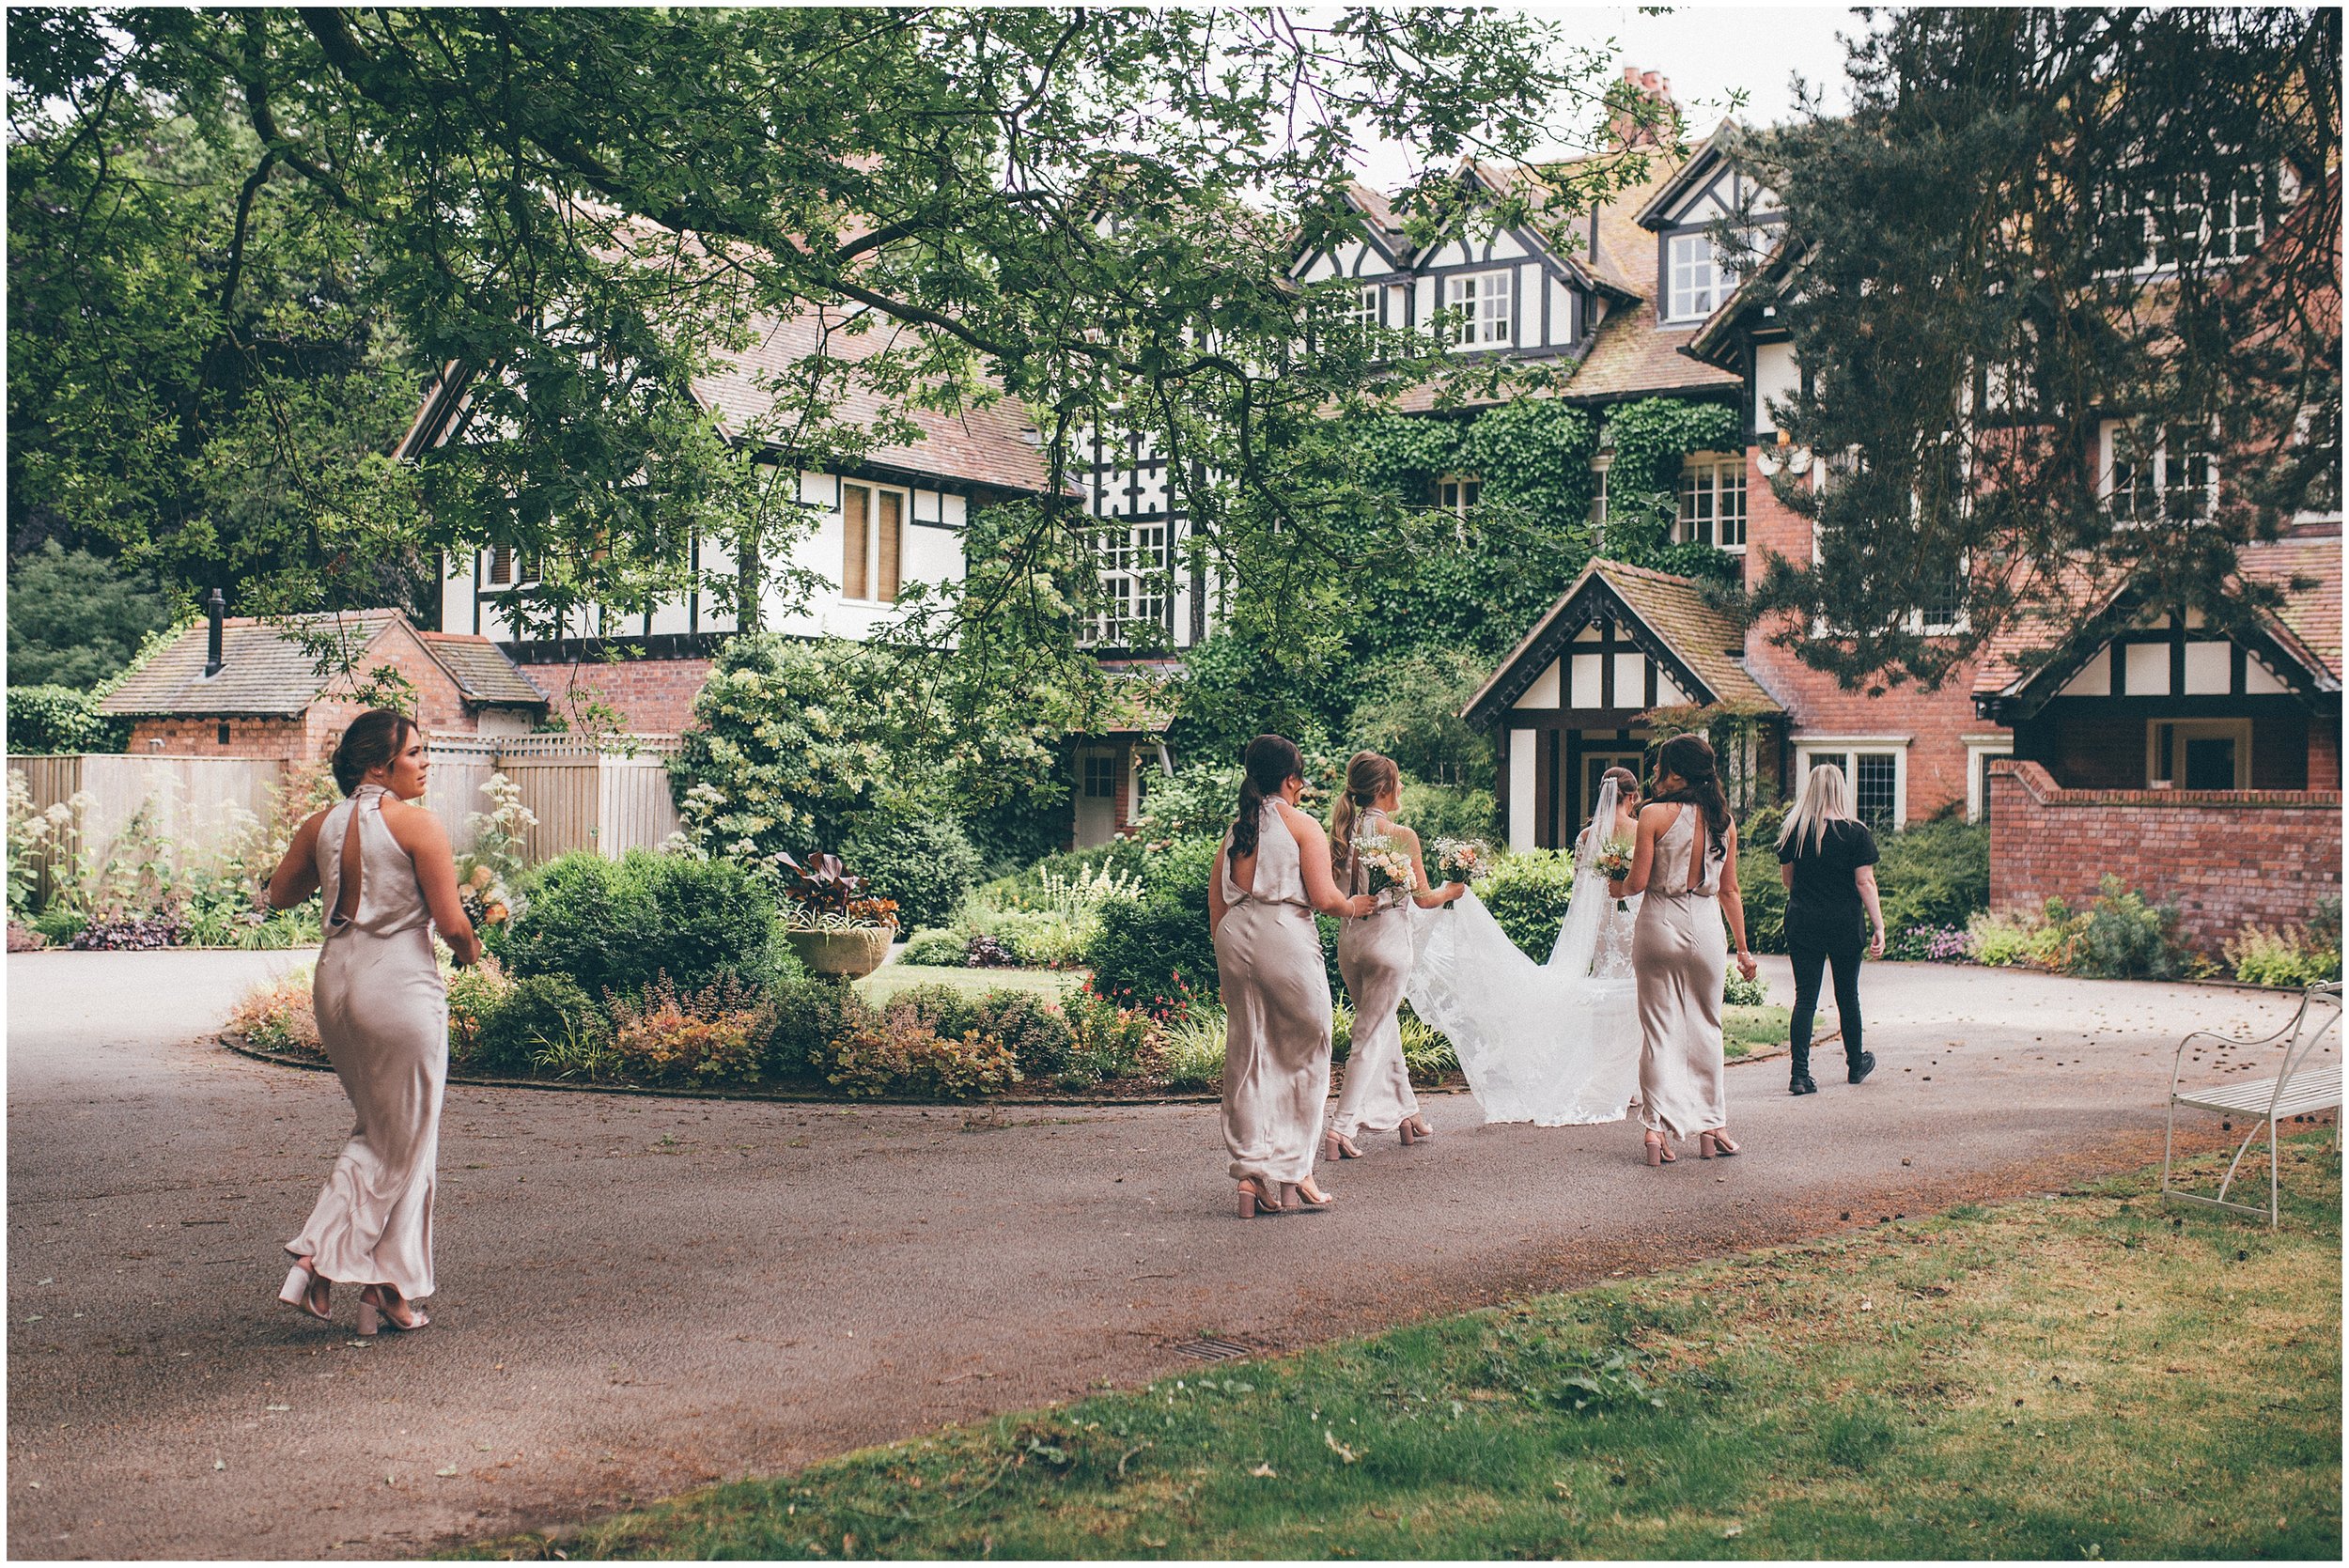 Bride and bridesmaids walk through house at Abbeywood Estate wedding venue in Delamere, Cheshire